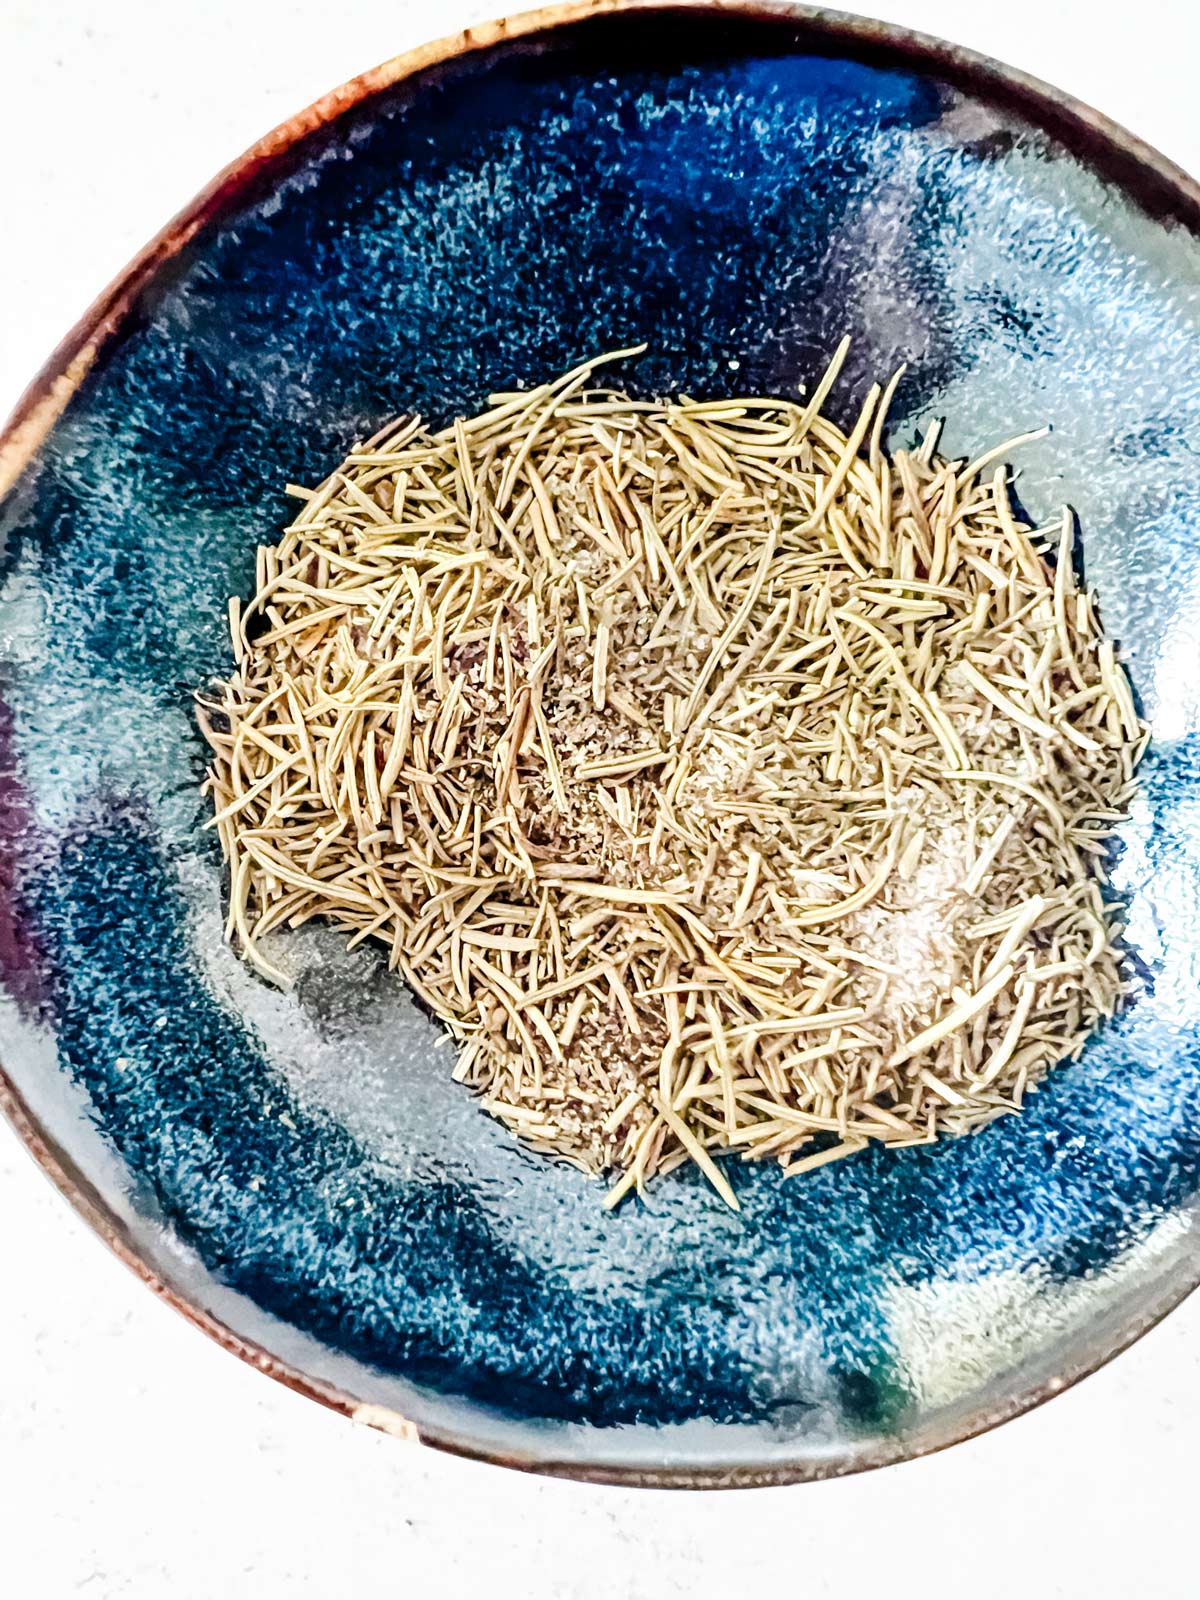 A small blue dish with seasonings.